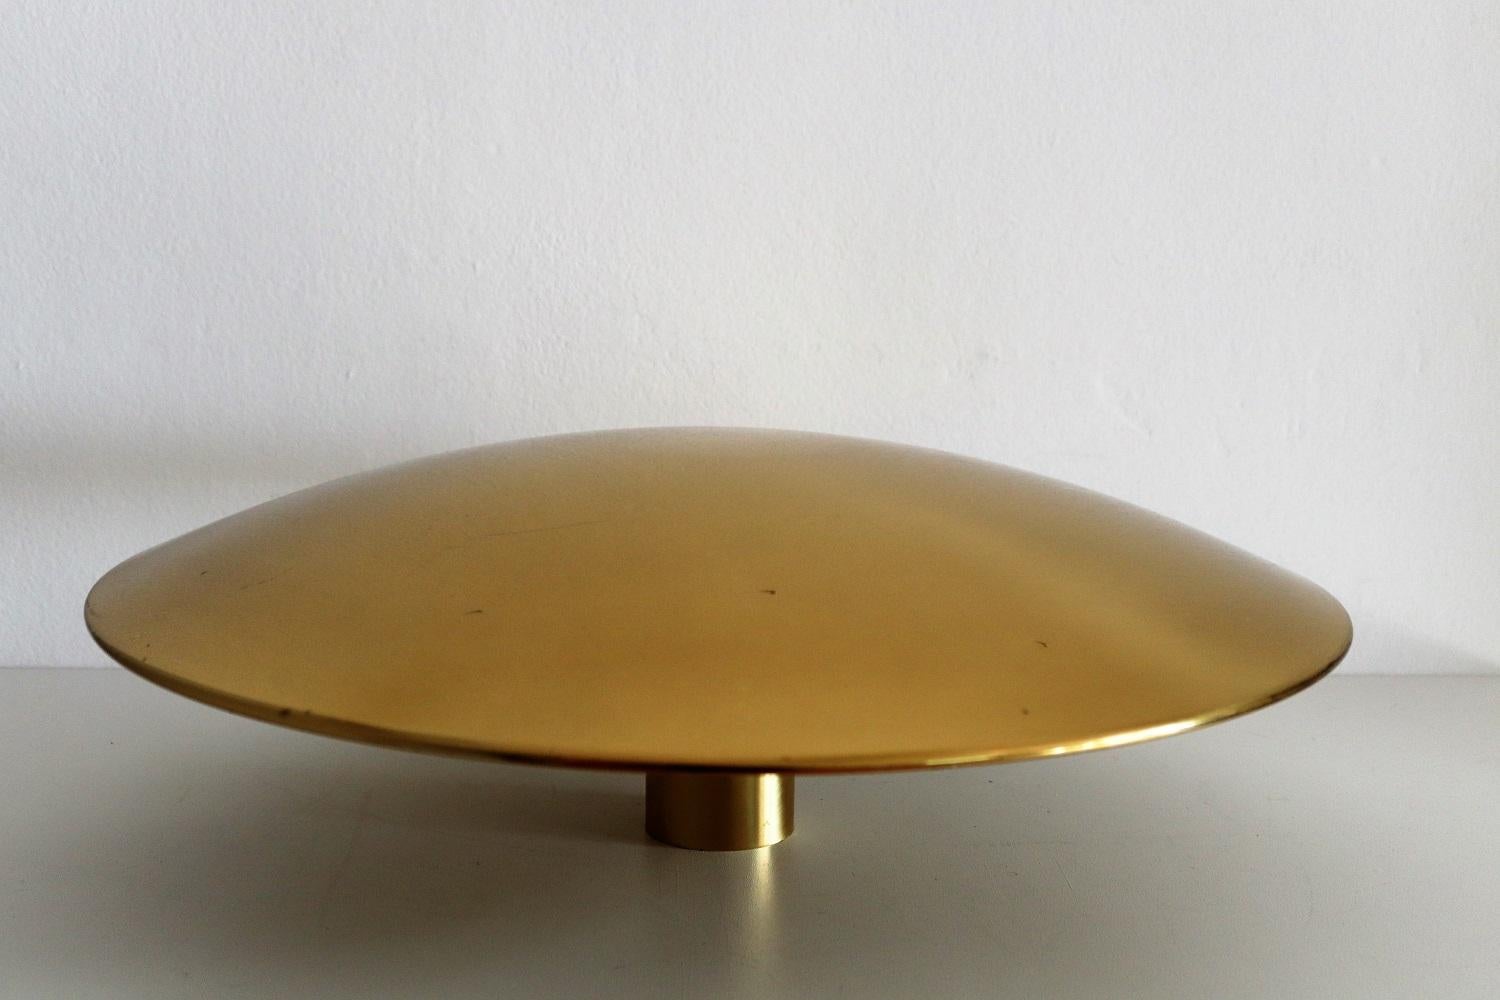 Late 20th Century Modernist Flushmount or Wall Light in Brass by Florian Schulz, 1980s